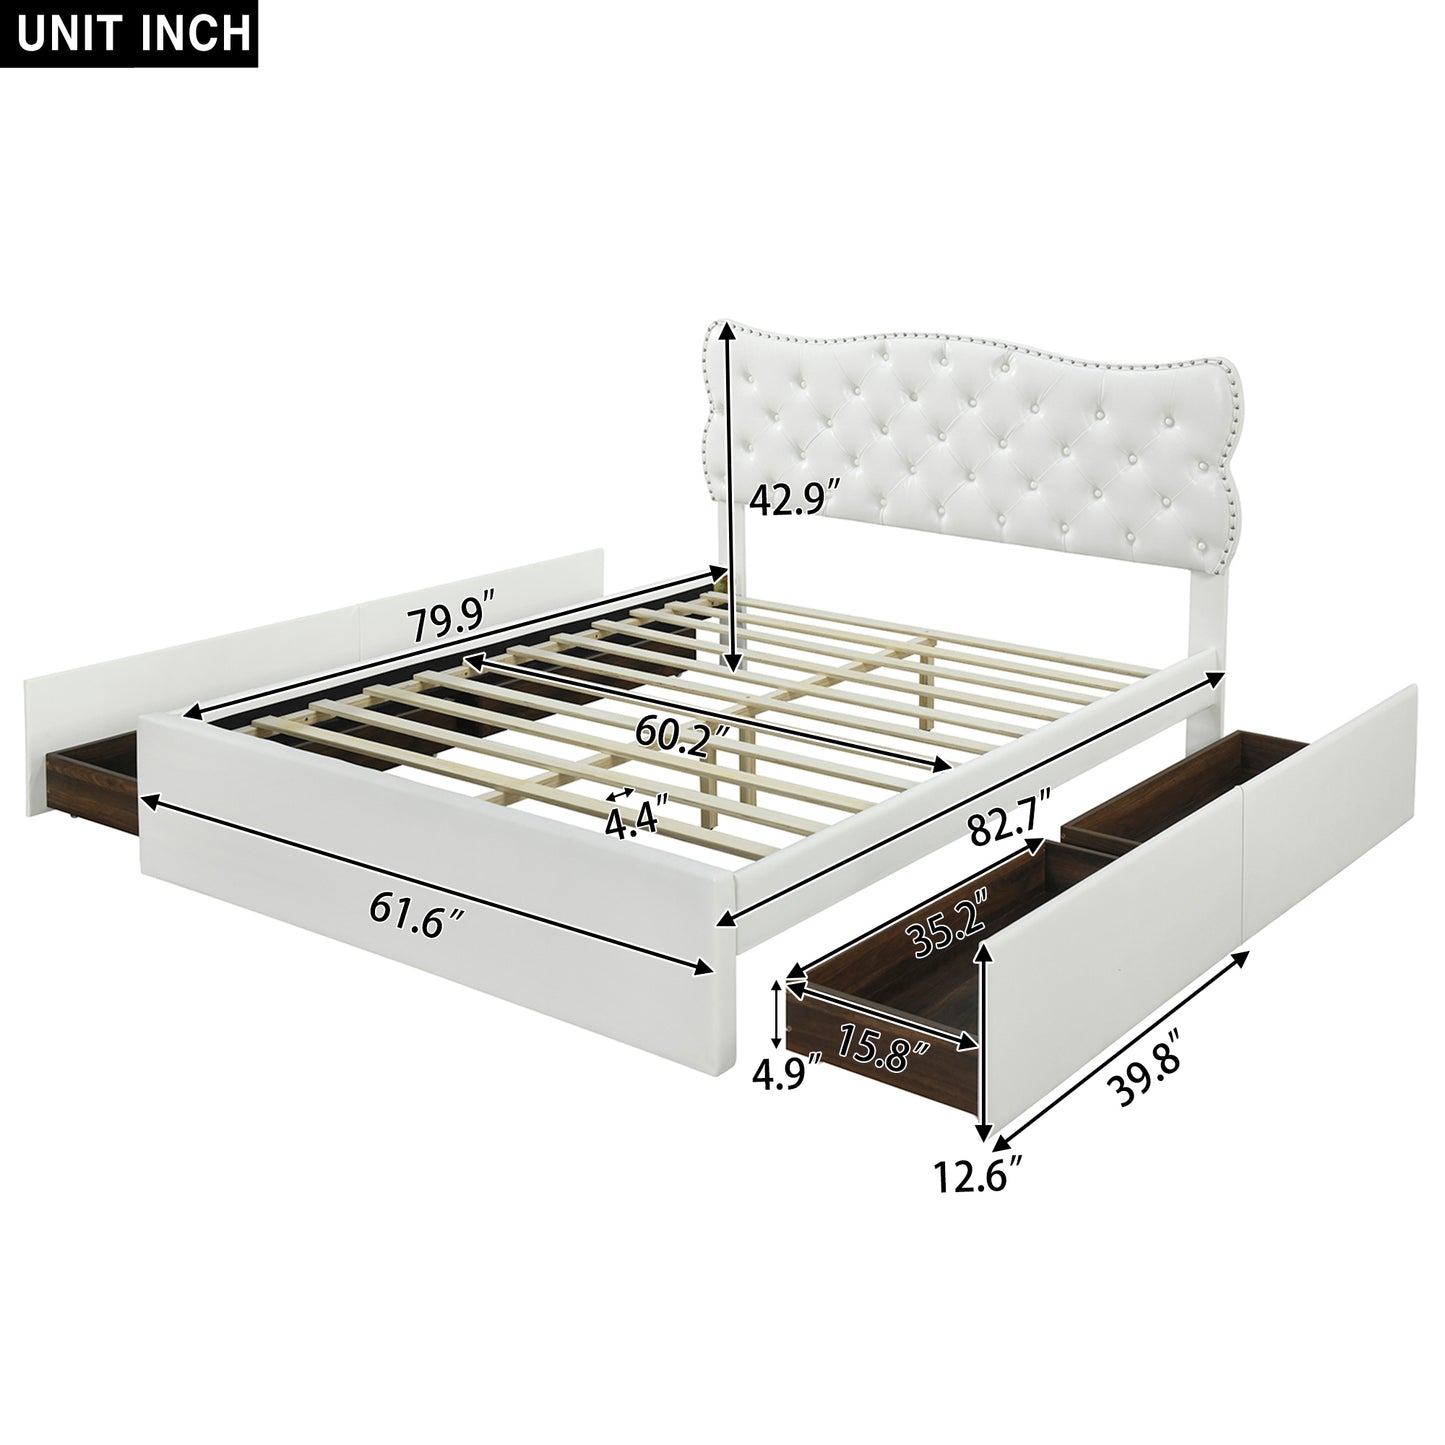 Queen Size Bed Frame with 4 Storage Drawers,Leather Upholstered Platform Heavy Duty Bed,Wood Slat Support,White